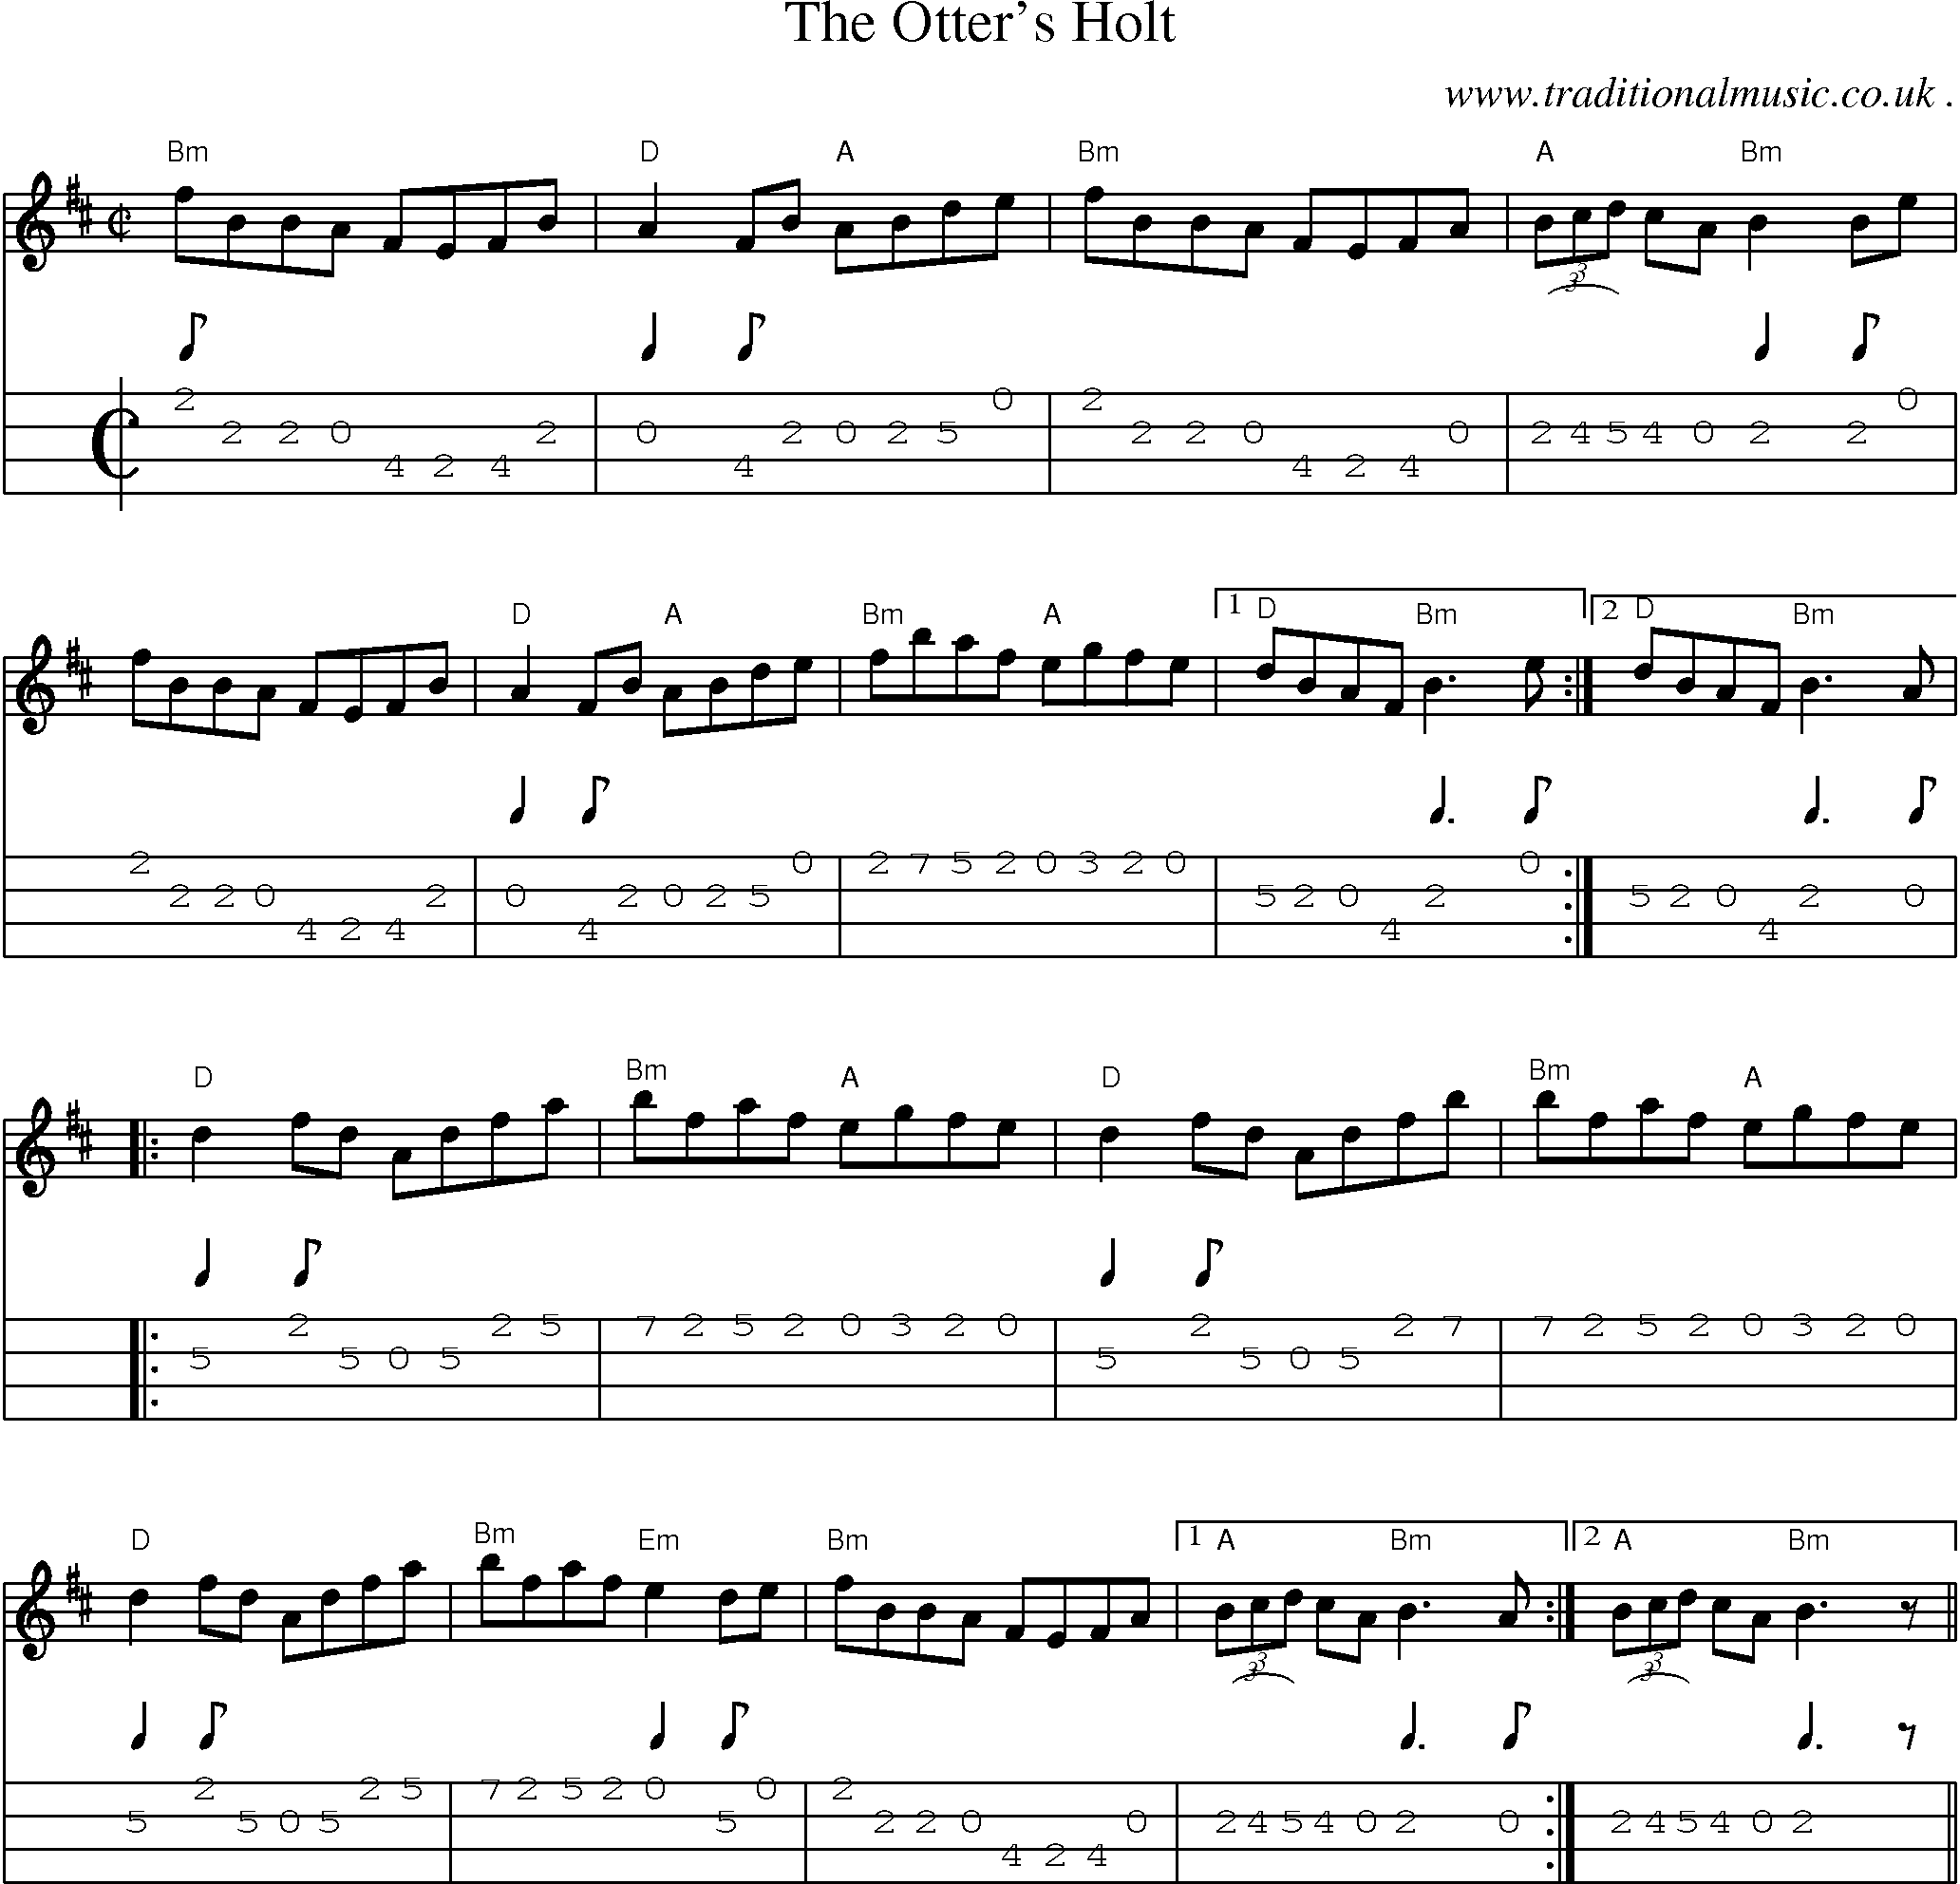 Music Score and Guitar Tabs for The Otters Holt